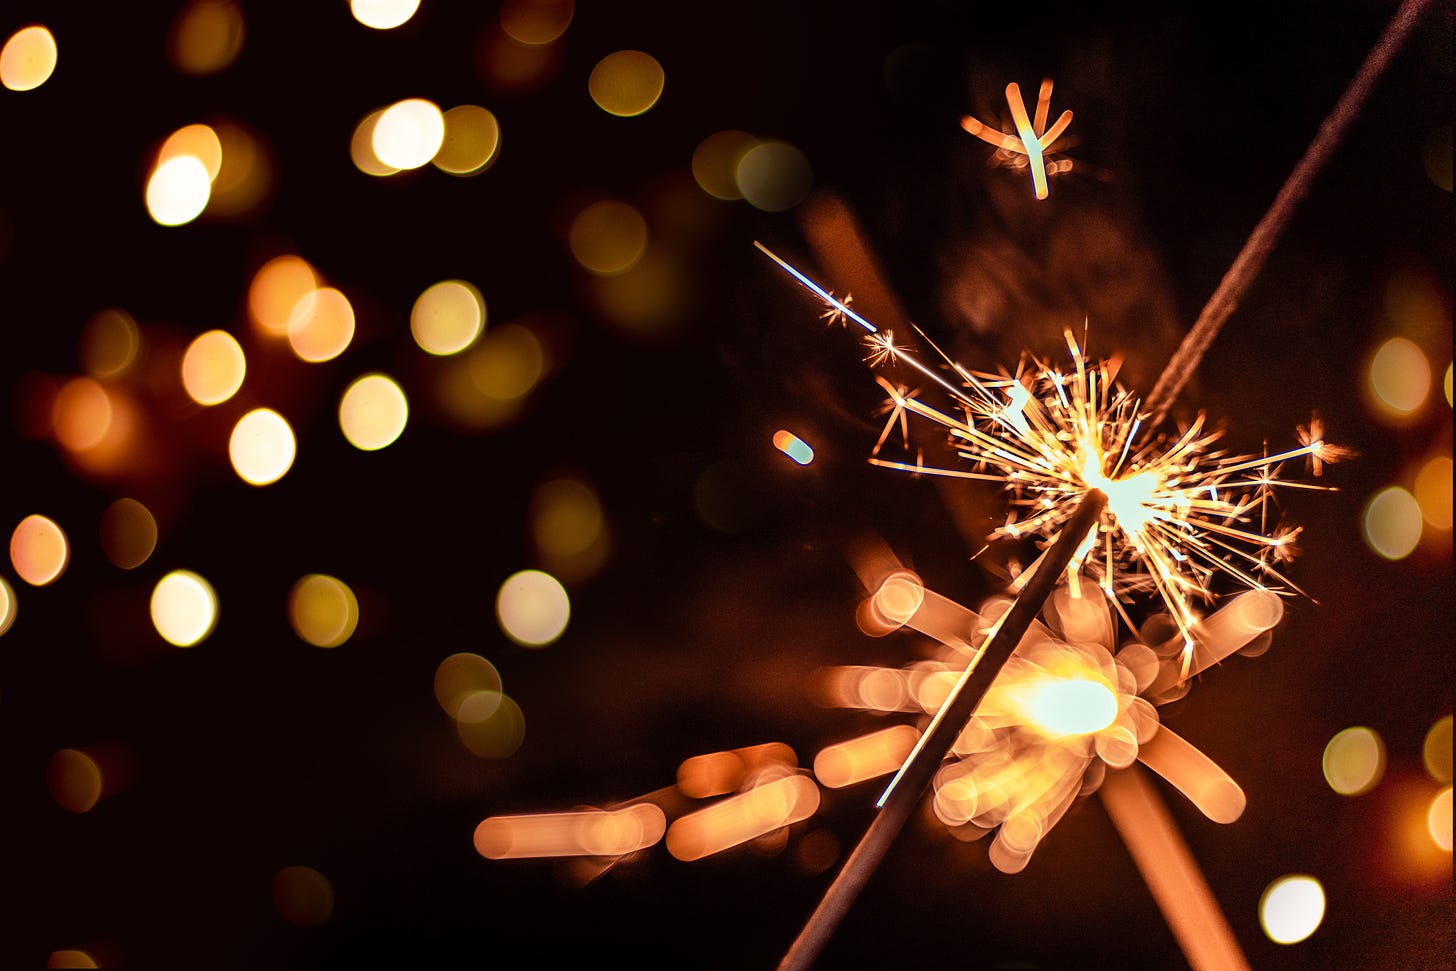 An image of a lit sparkler and in the background, twinkly lights. 